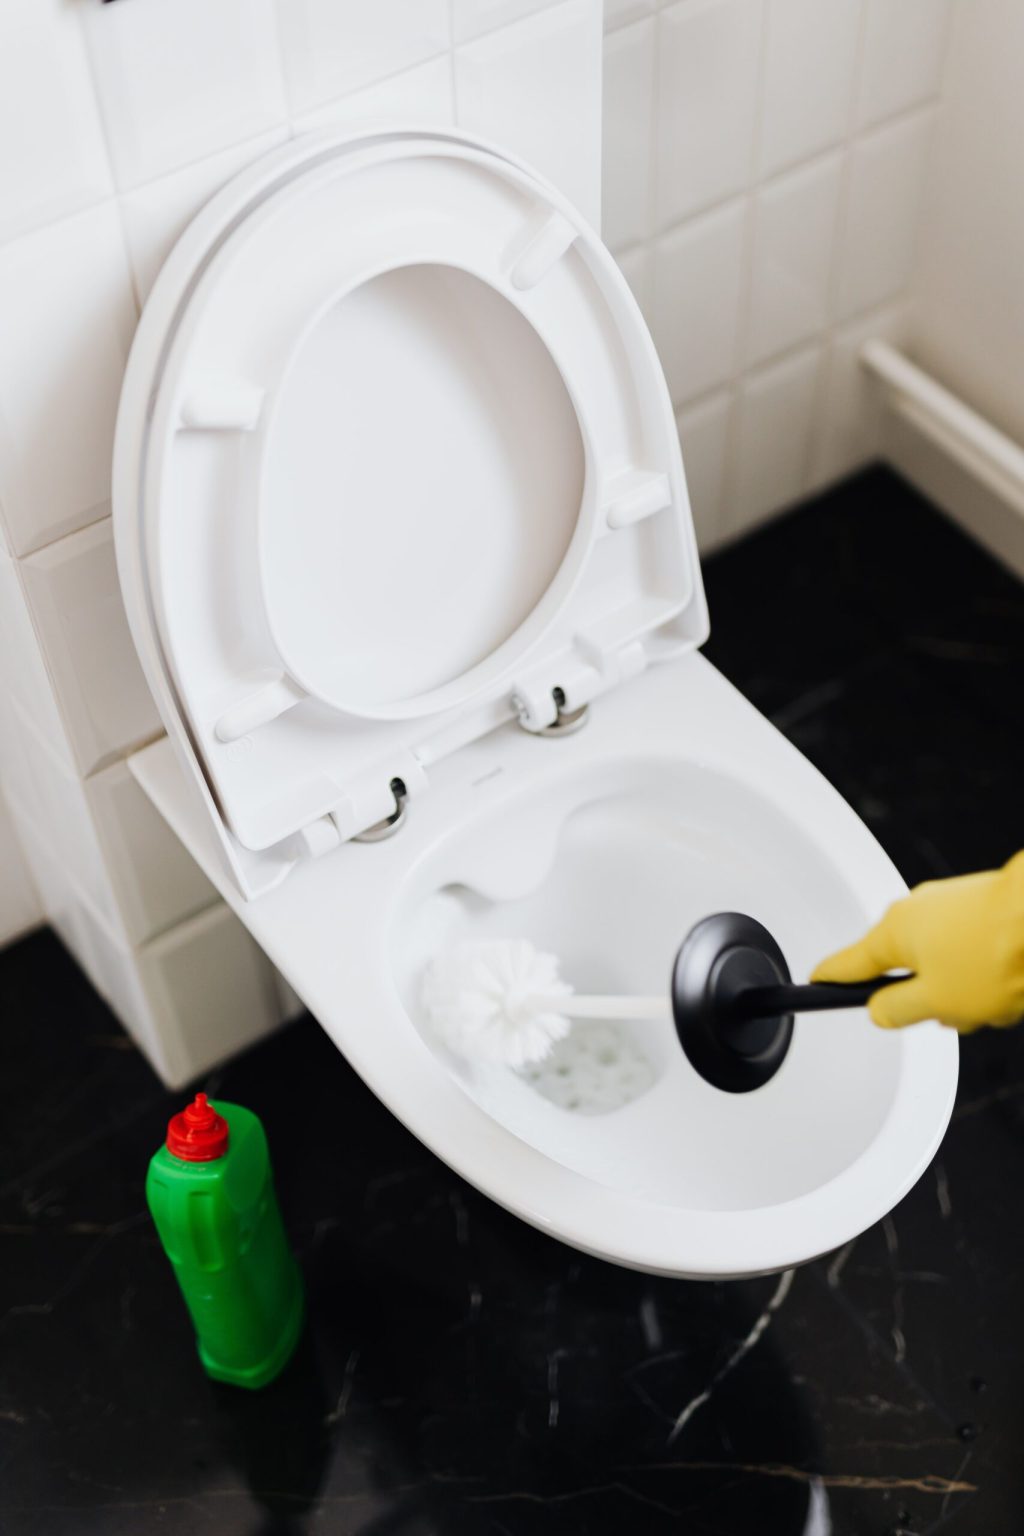 Not just bleach, to clean and whiten a toilet brush, we use these 3 powerful natural products